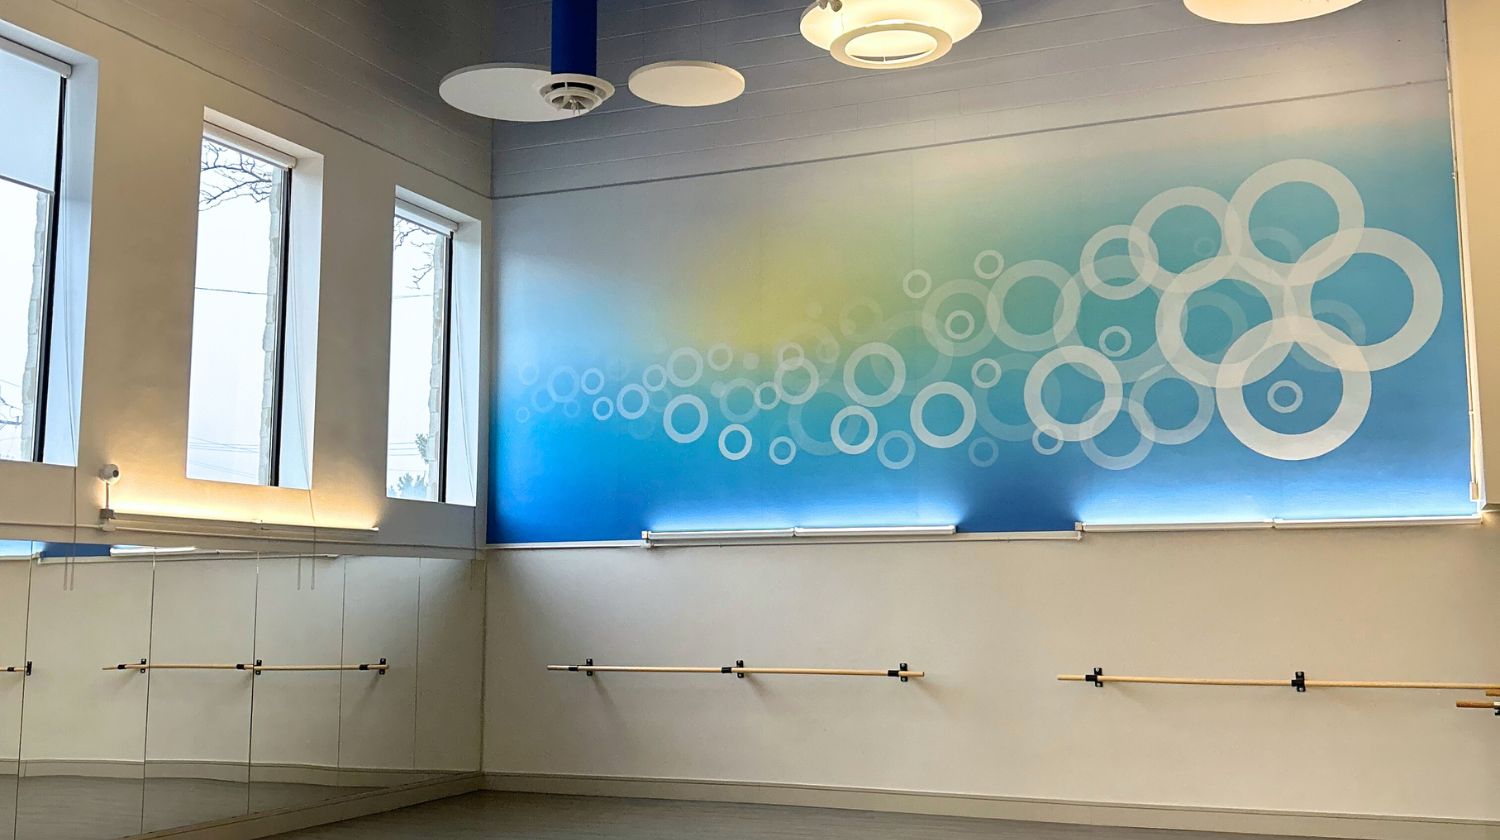 Image of the mind and body studio at our Mayfair West Club in North York. The room has a window and a blue mural with an illustration of circles on it.